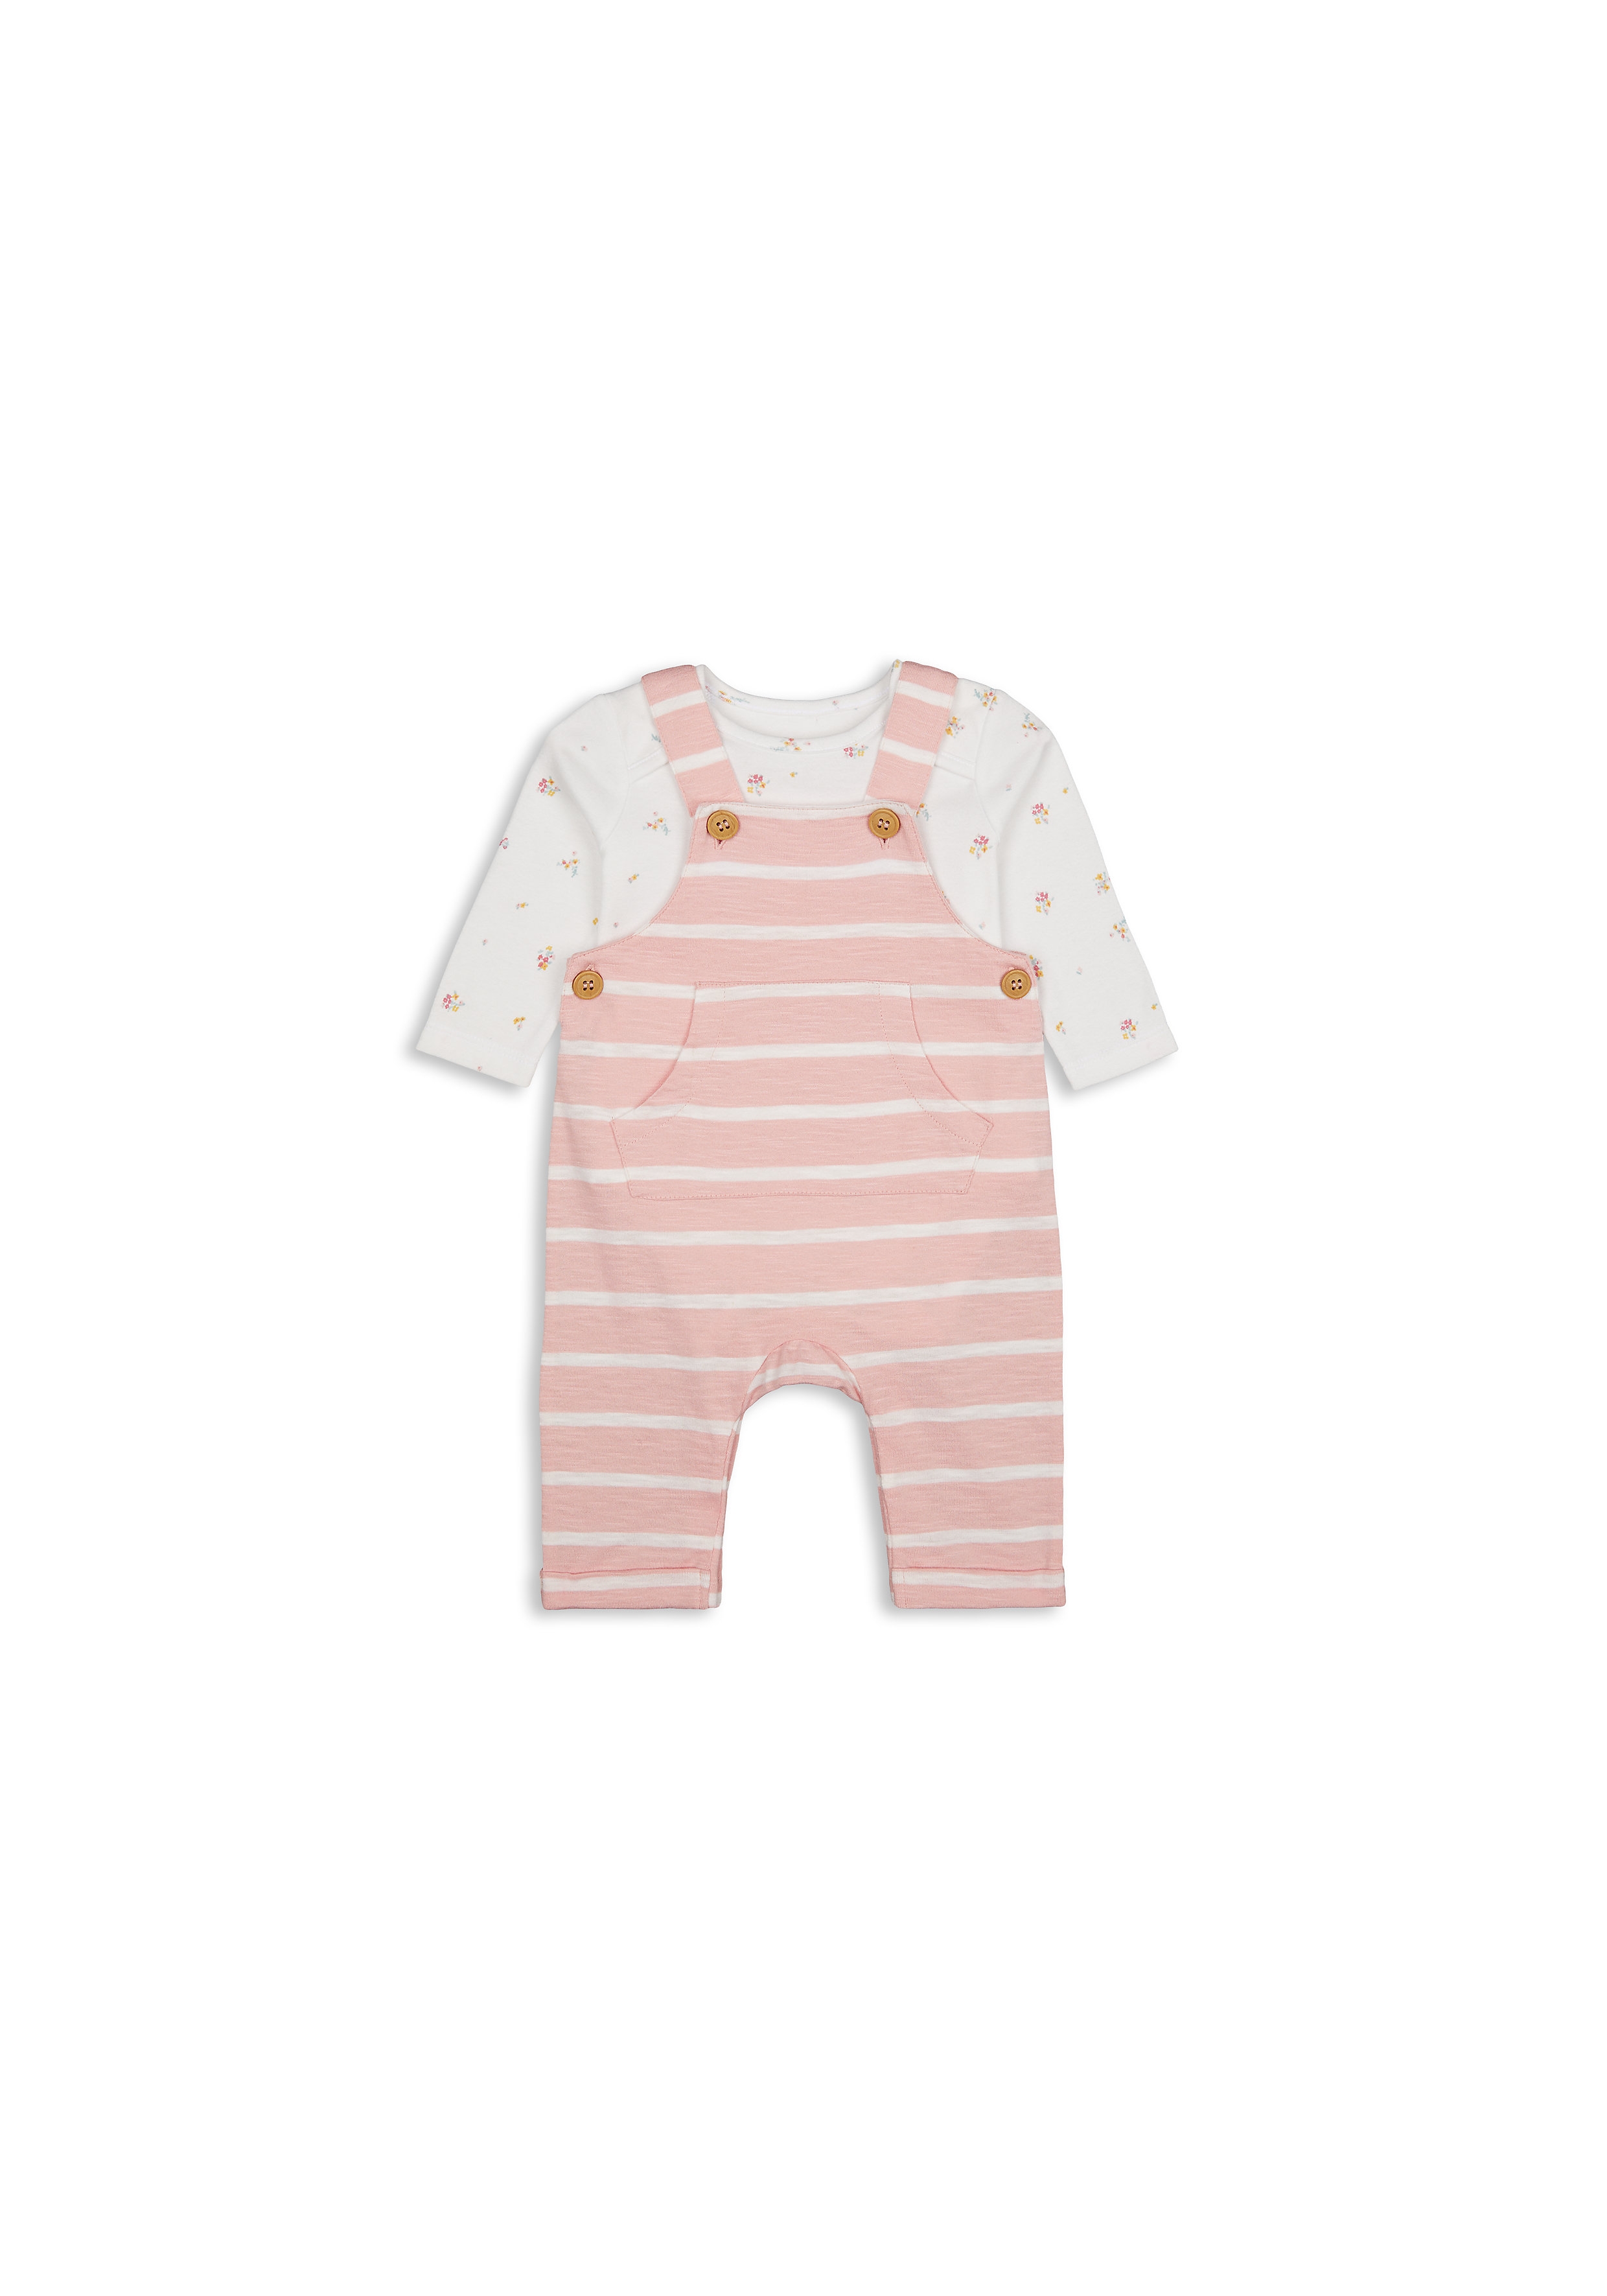 Mothercare | Girls Full Sleeves Dungaree Set Striped - Pink